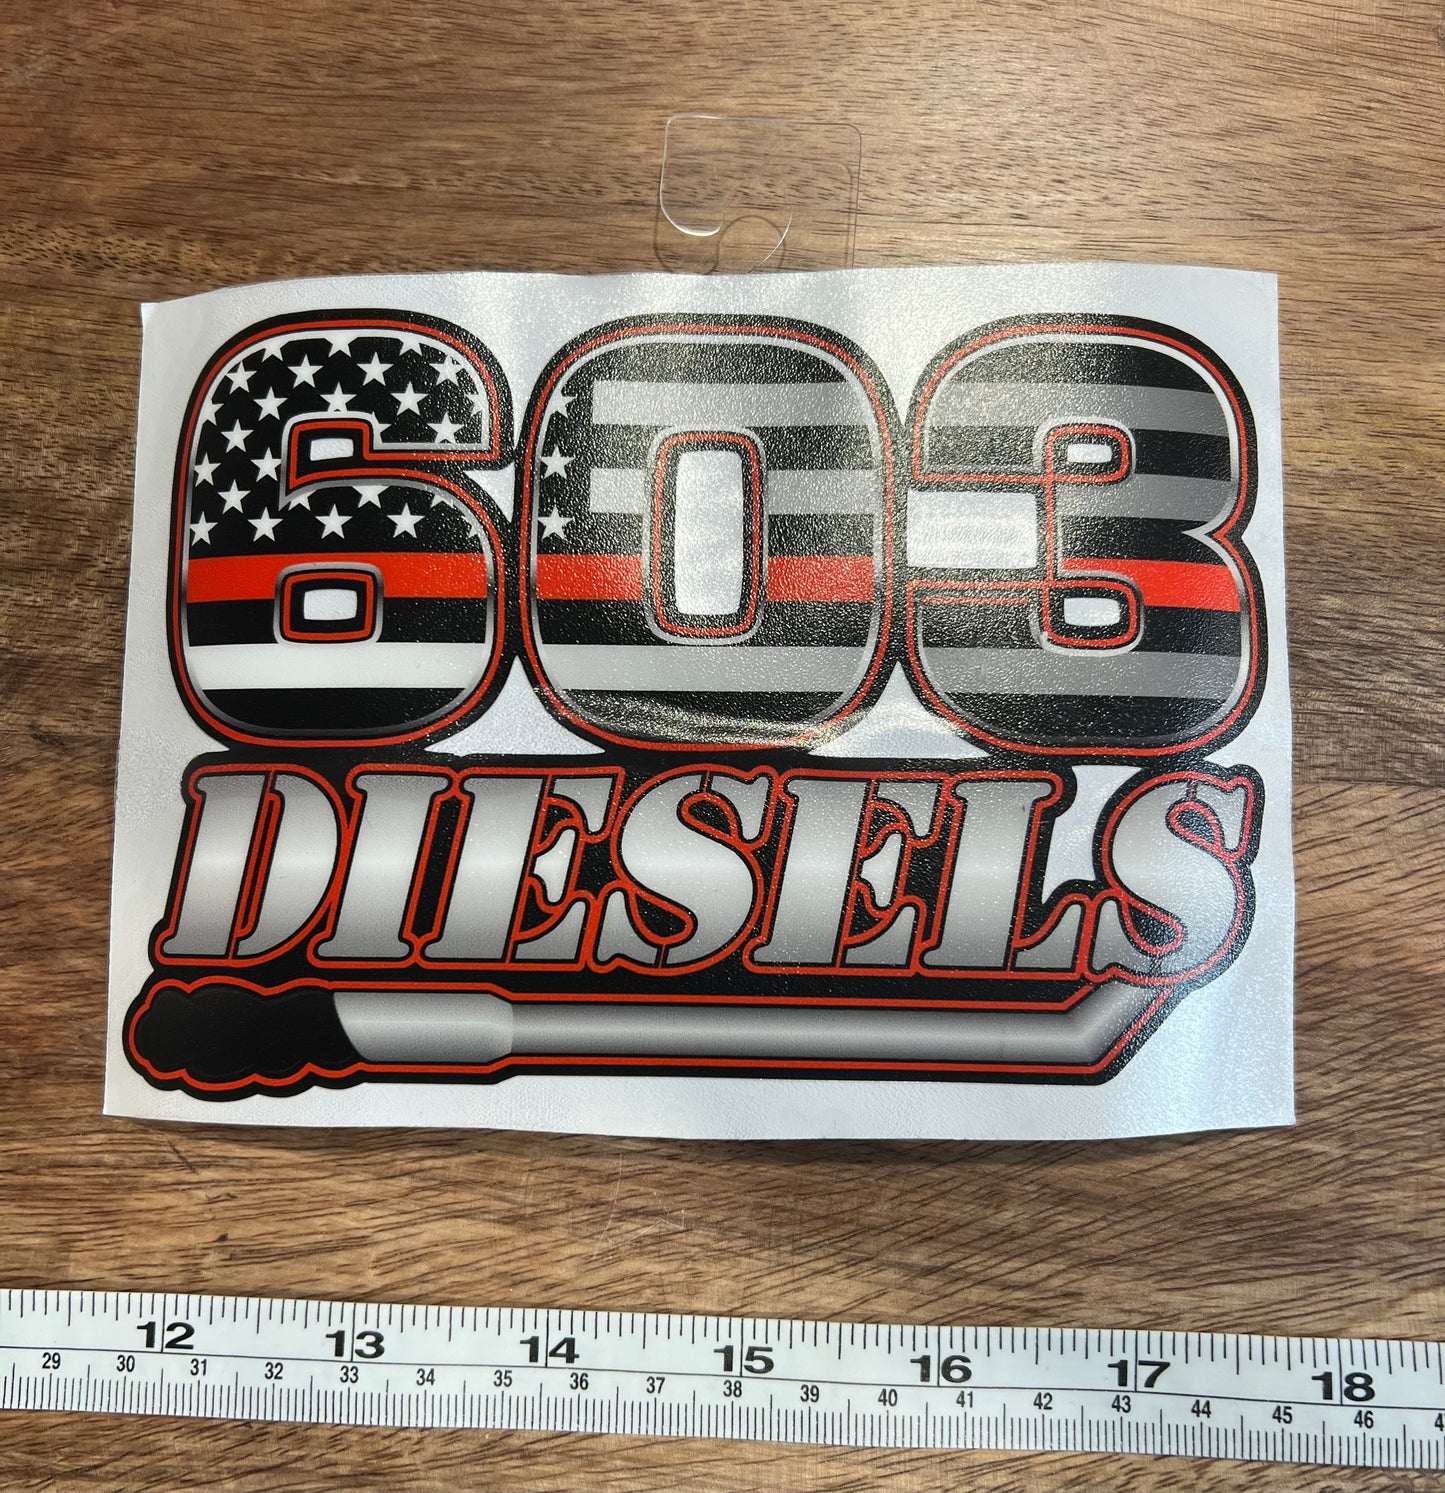 603 Diesels Classic Decal